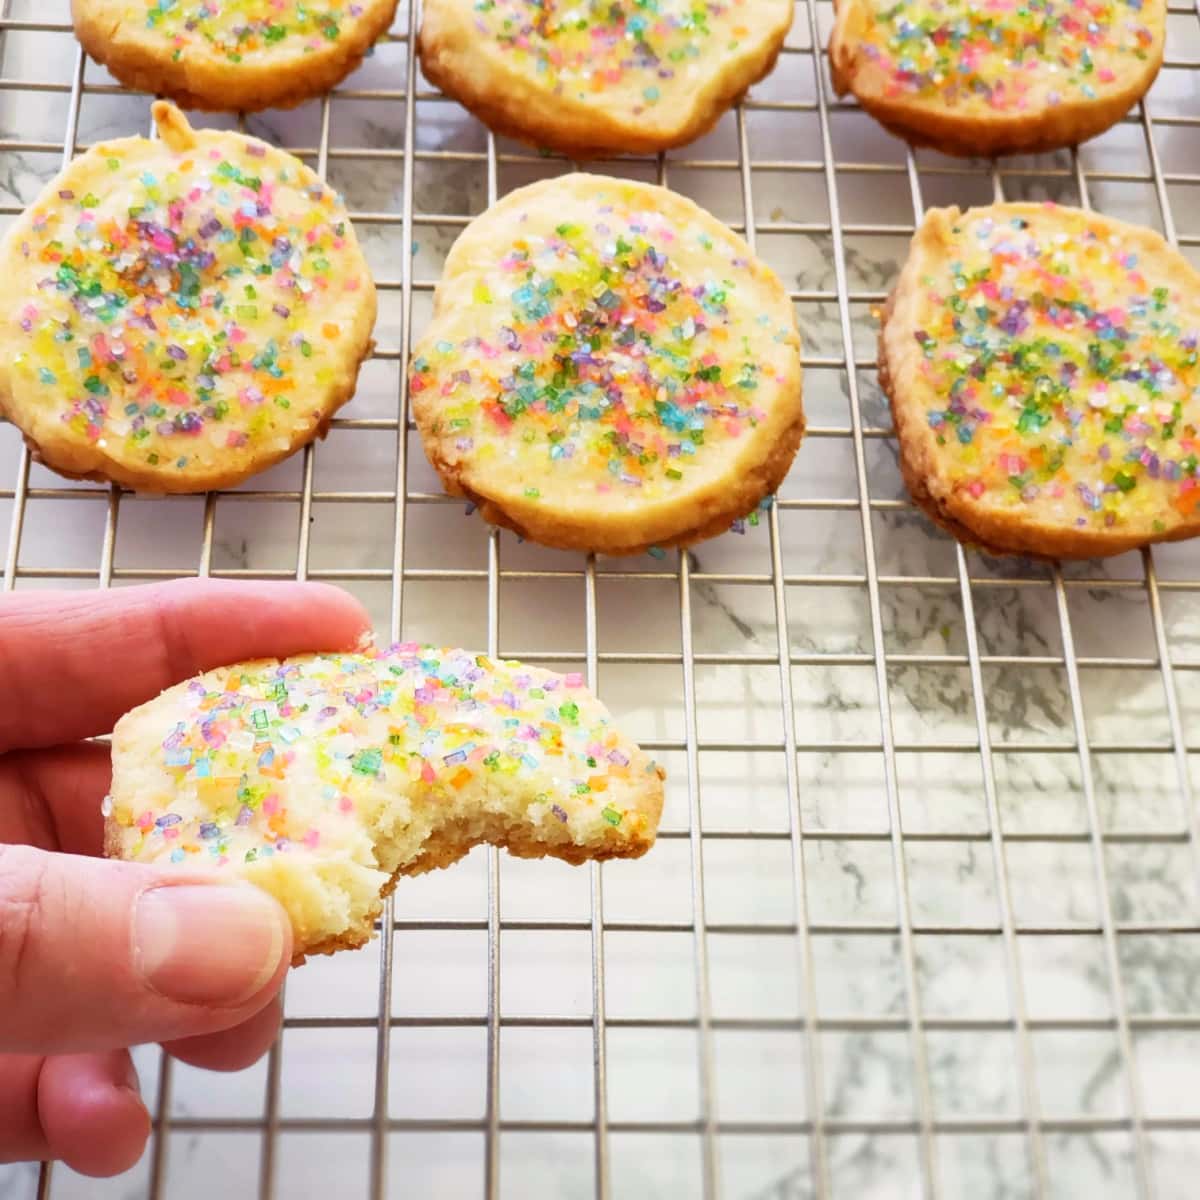 A hand holds a bitten cookie with other cookies in the background on a cooling rack